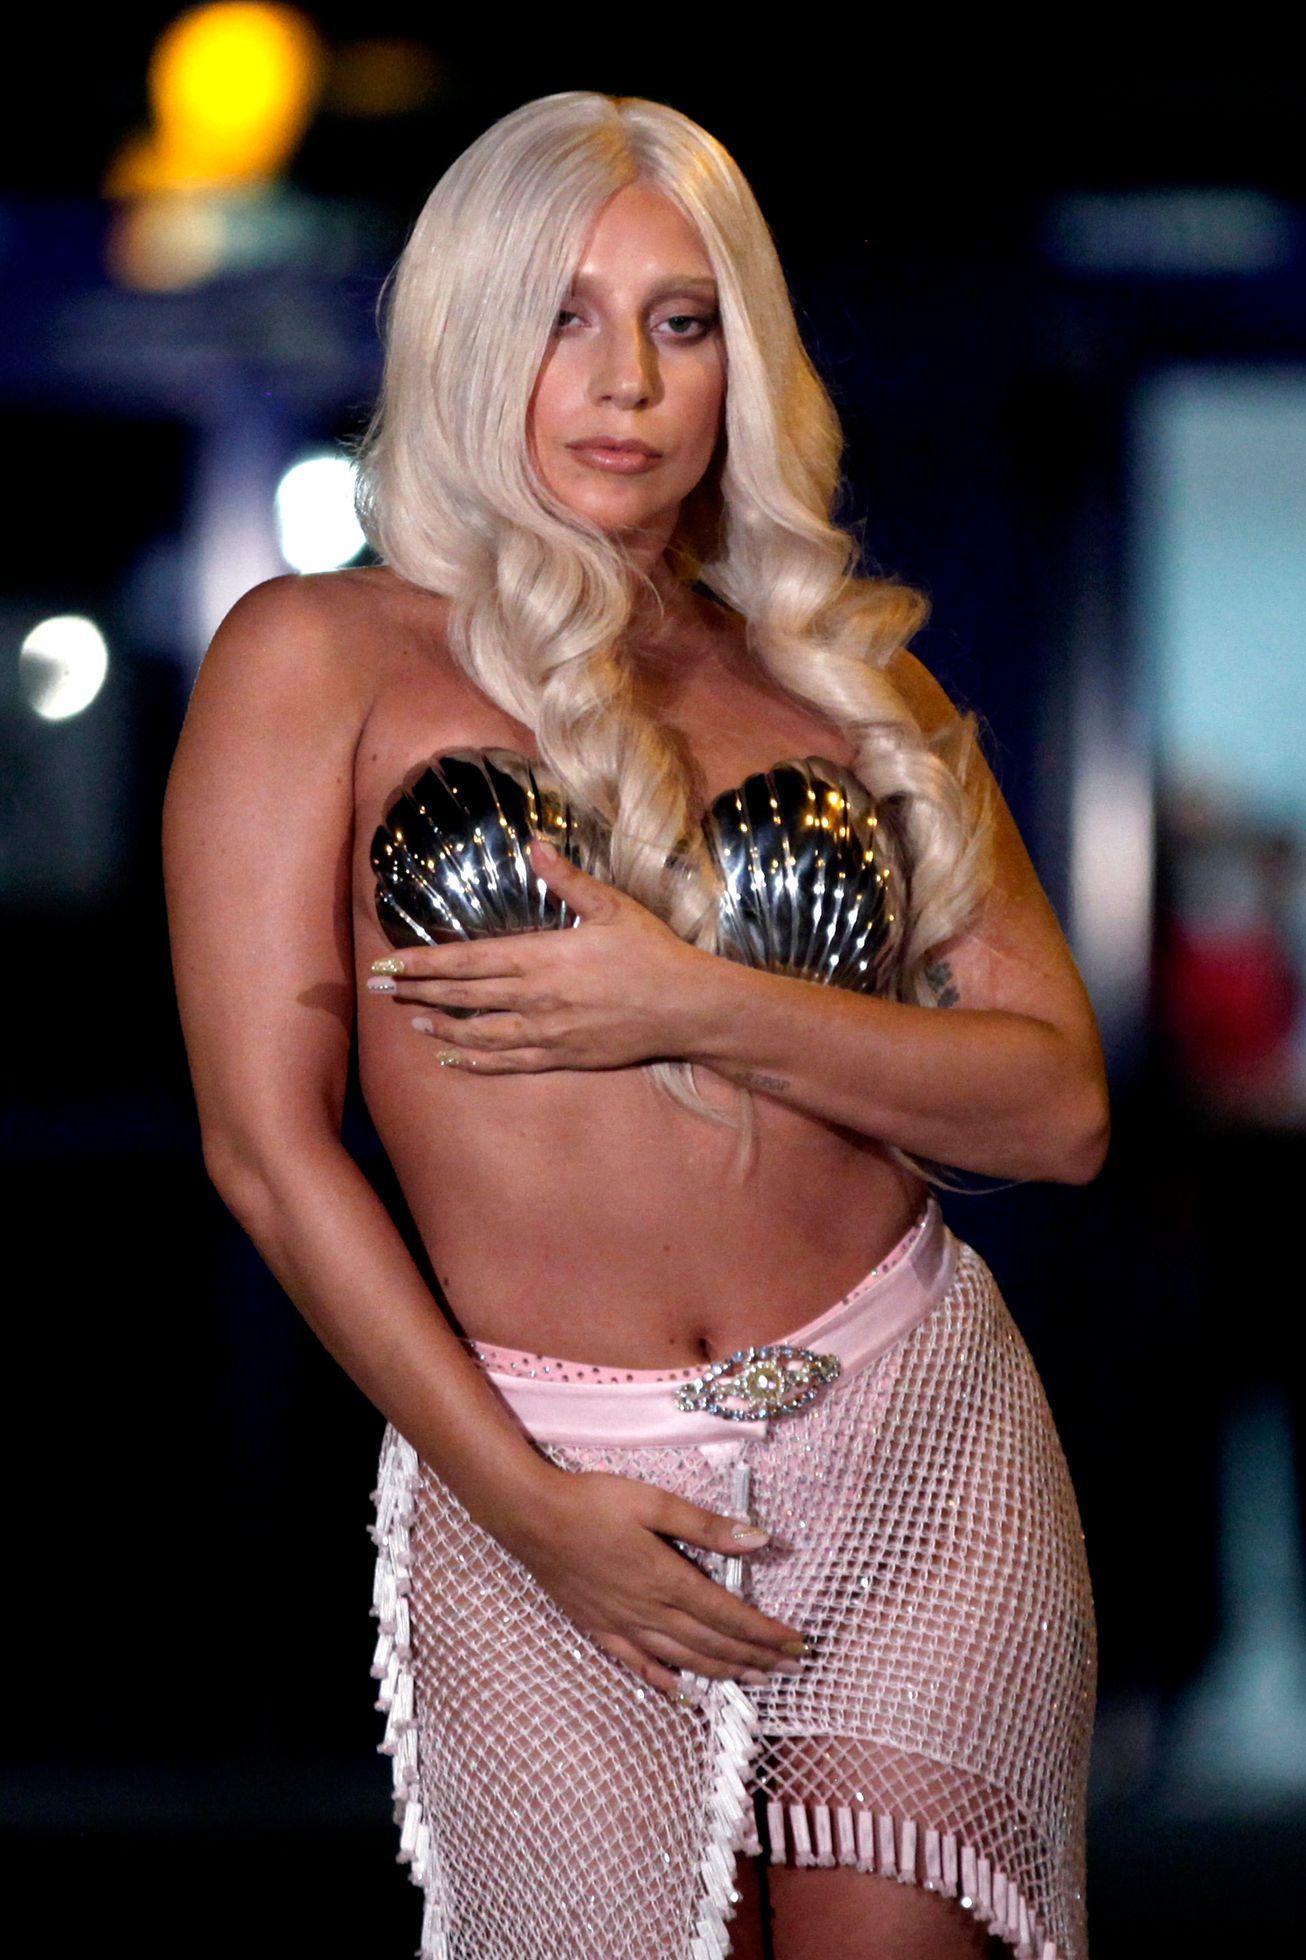 Singer Lady Gaga poses for the media upon her arrival at the Athens' Eleftherios Venizelos airport